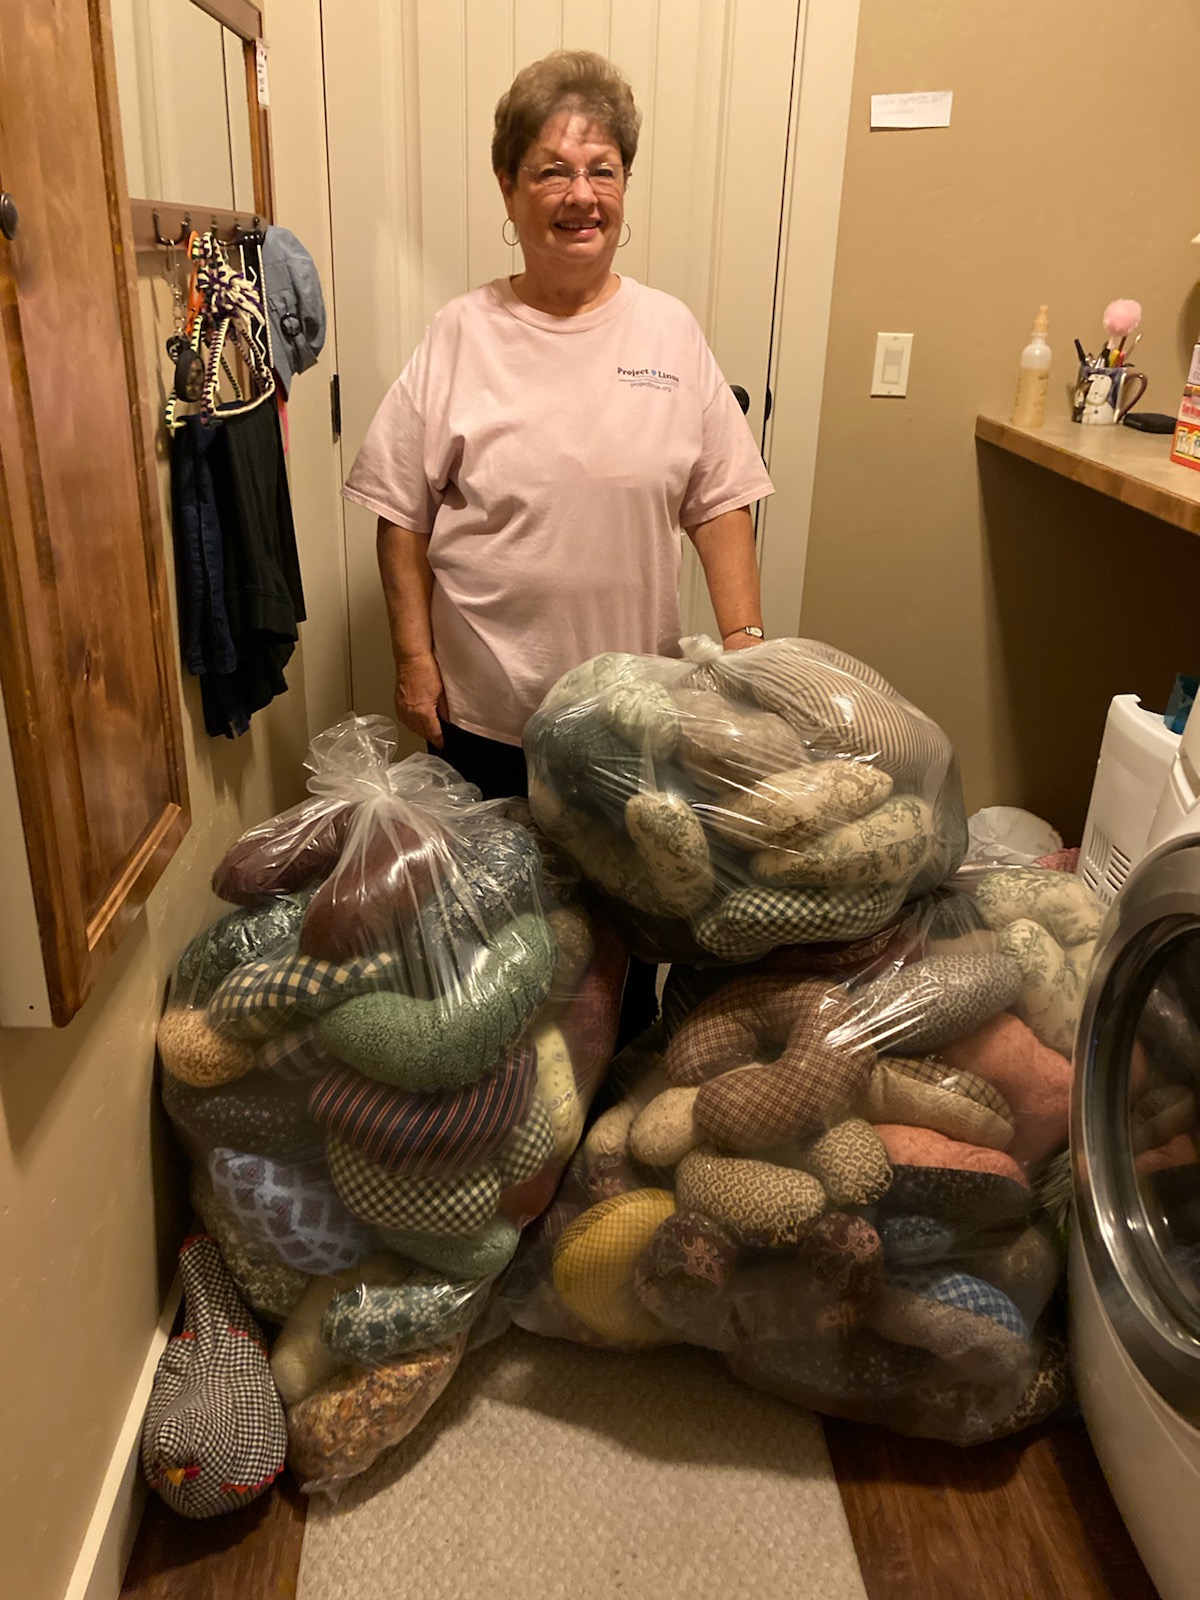 Volunteer posing with large bags filled with neck pillows for donation